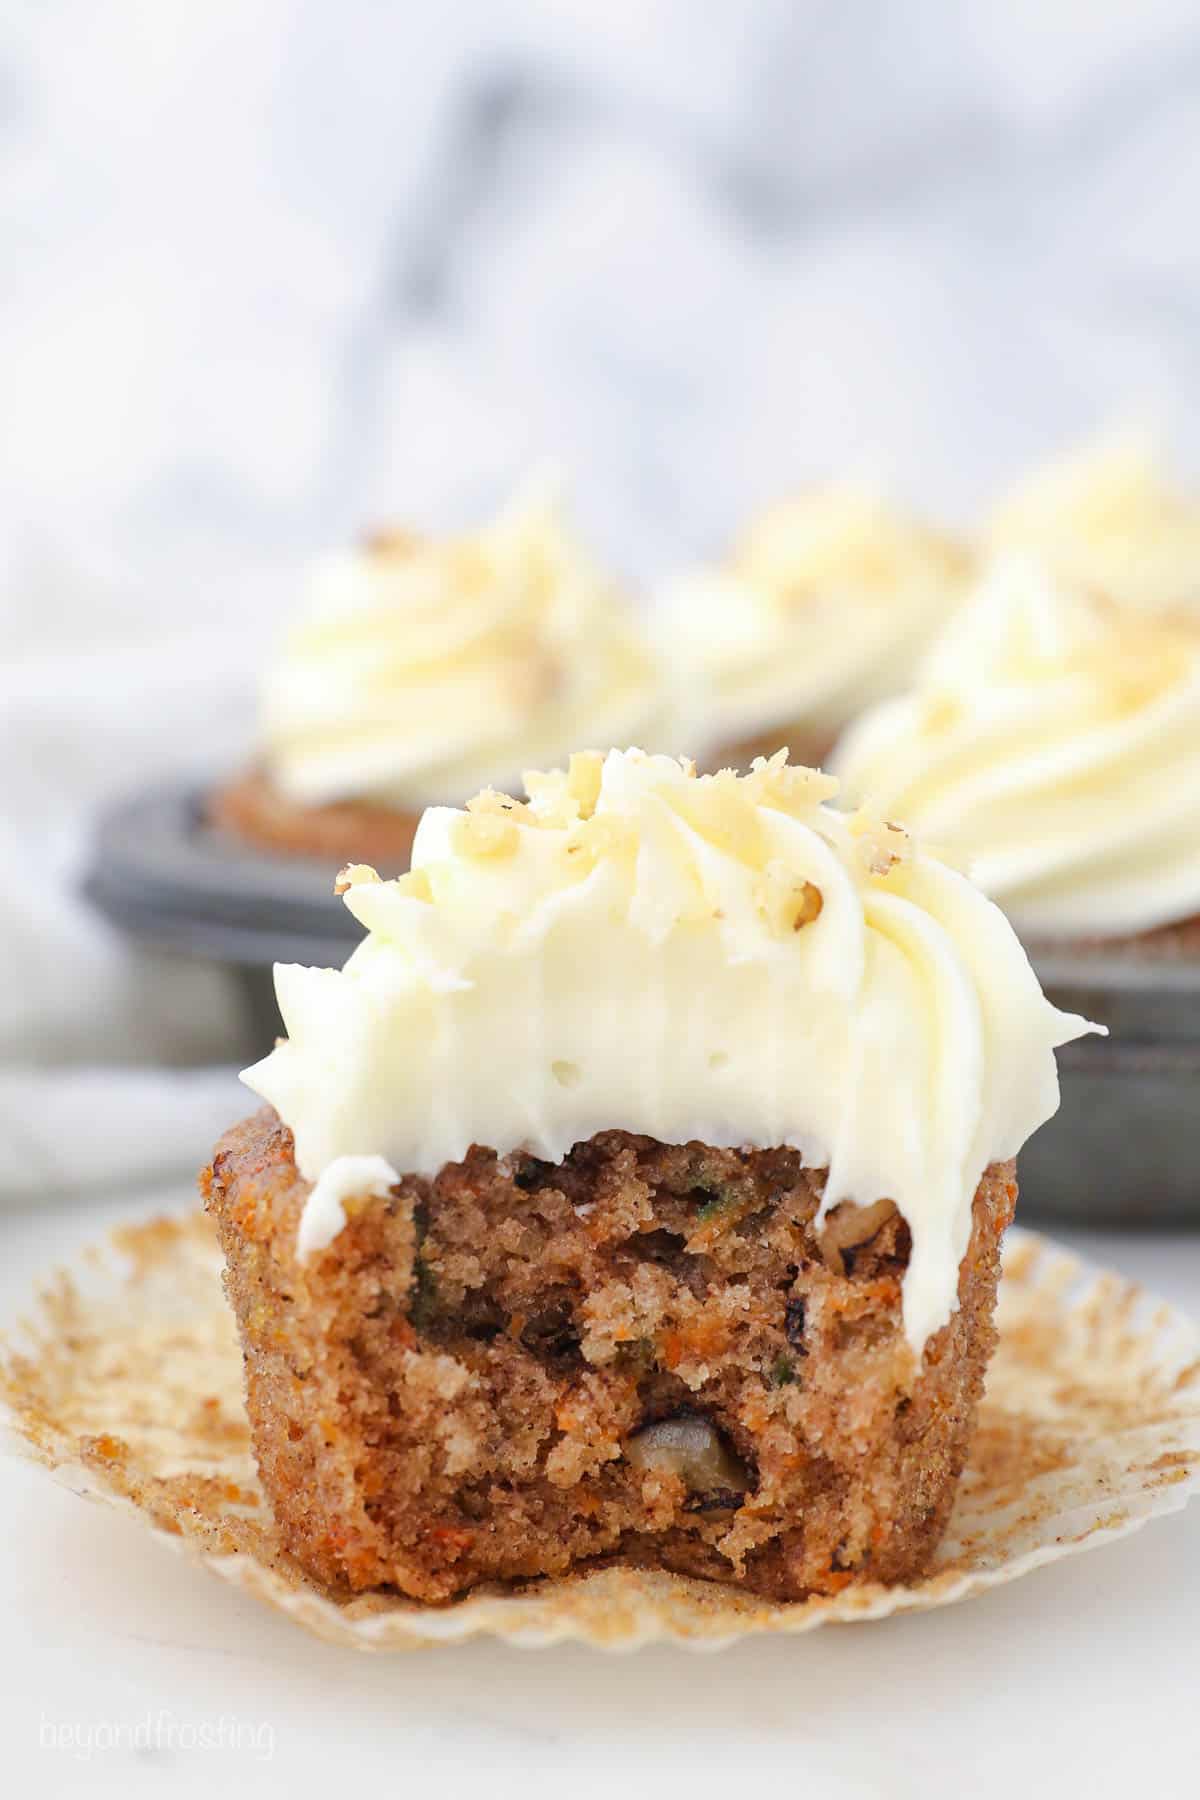 A carrot cake cupcake with a bite taken out of it and a pan containing more cupcakes behind it